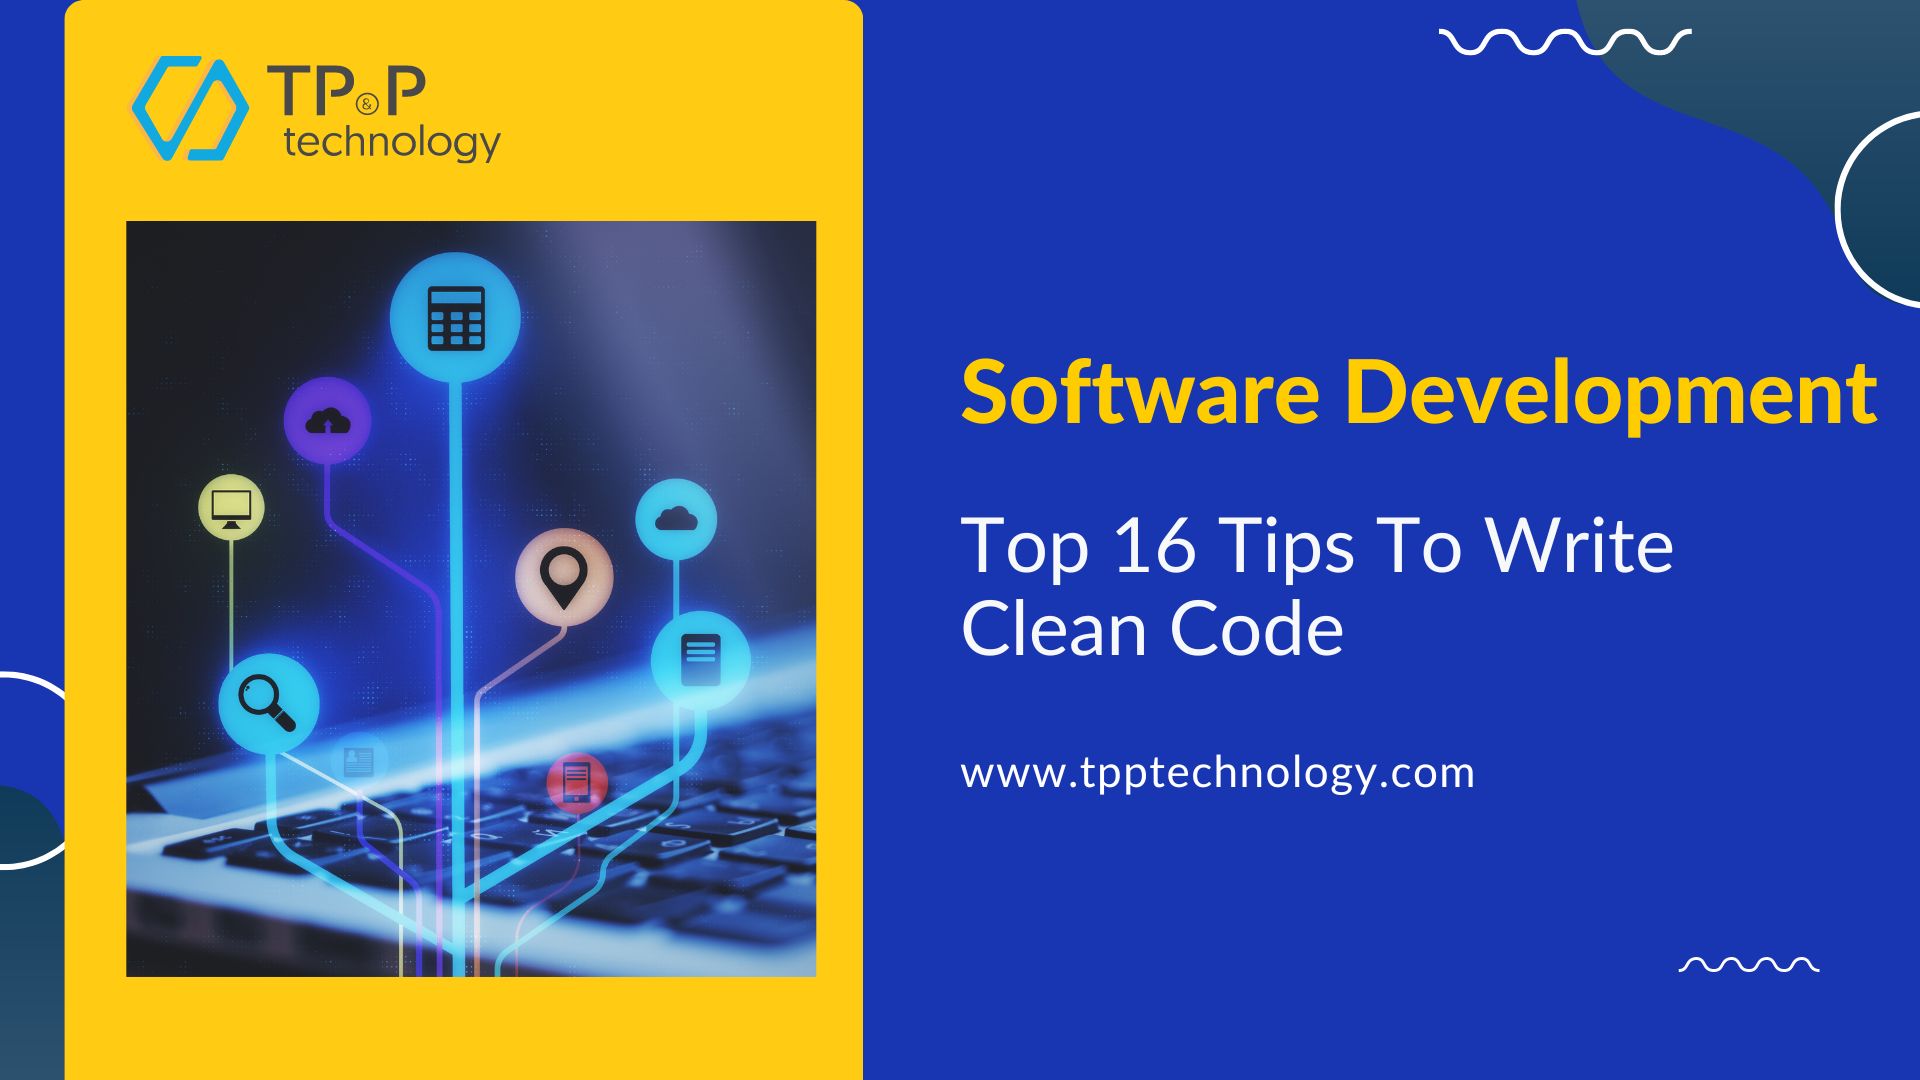 Software Development: Top 16 Tips To Write Clean Code 